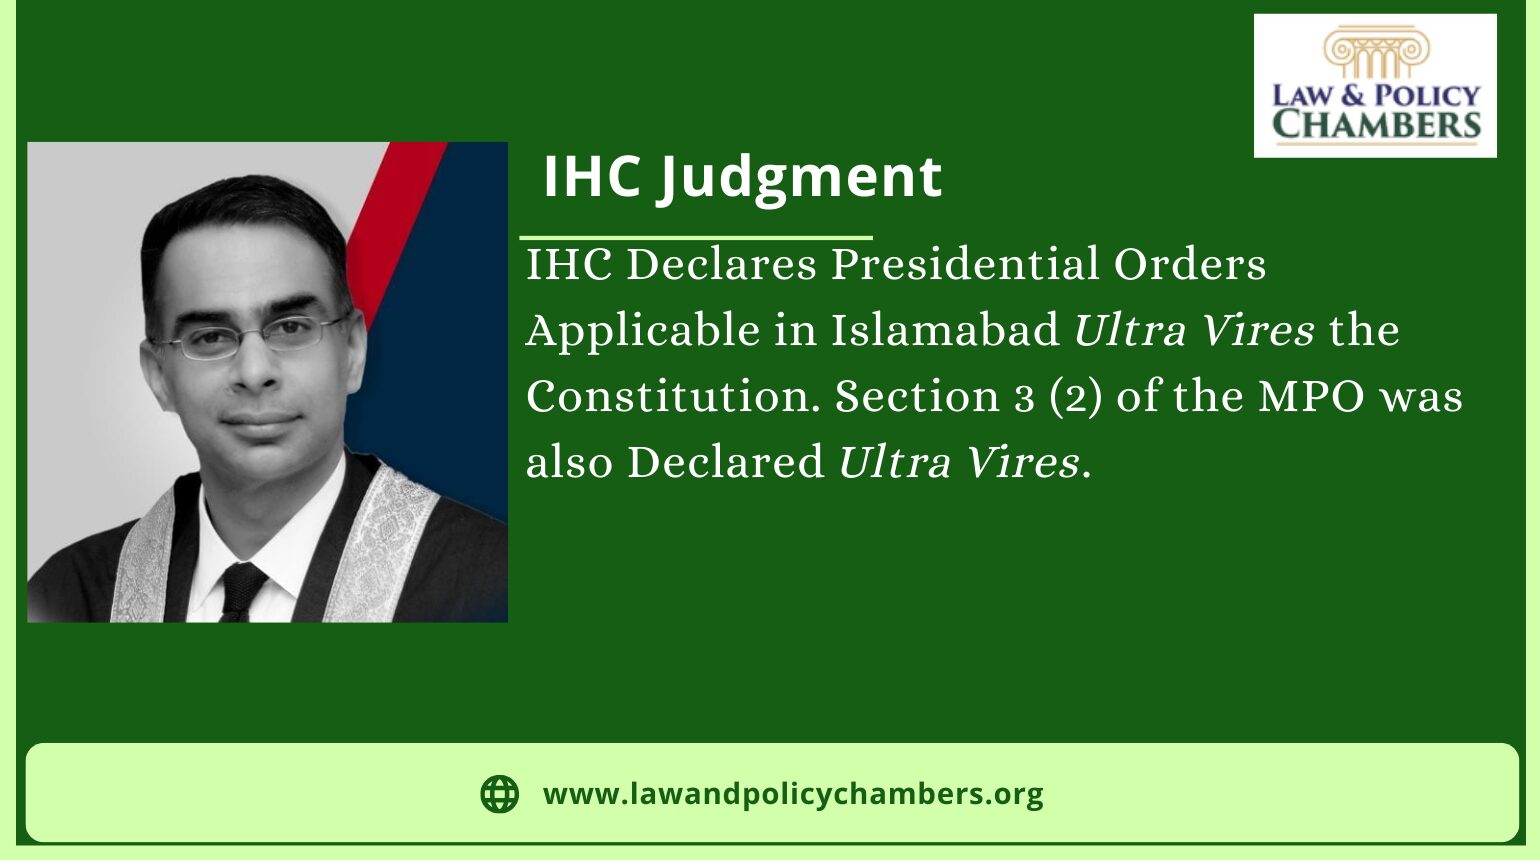 IHC Declares Presidential Orders Applicable to Islamabad Ultra Vires The Constitution.